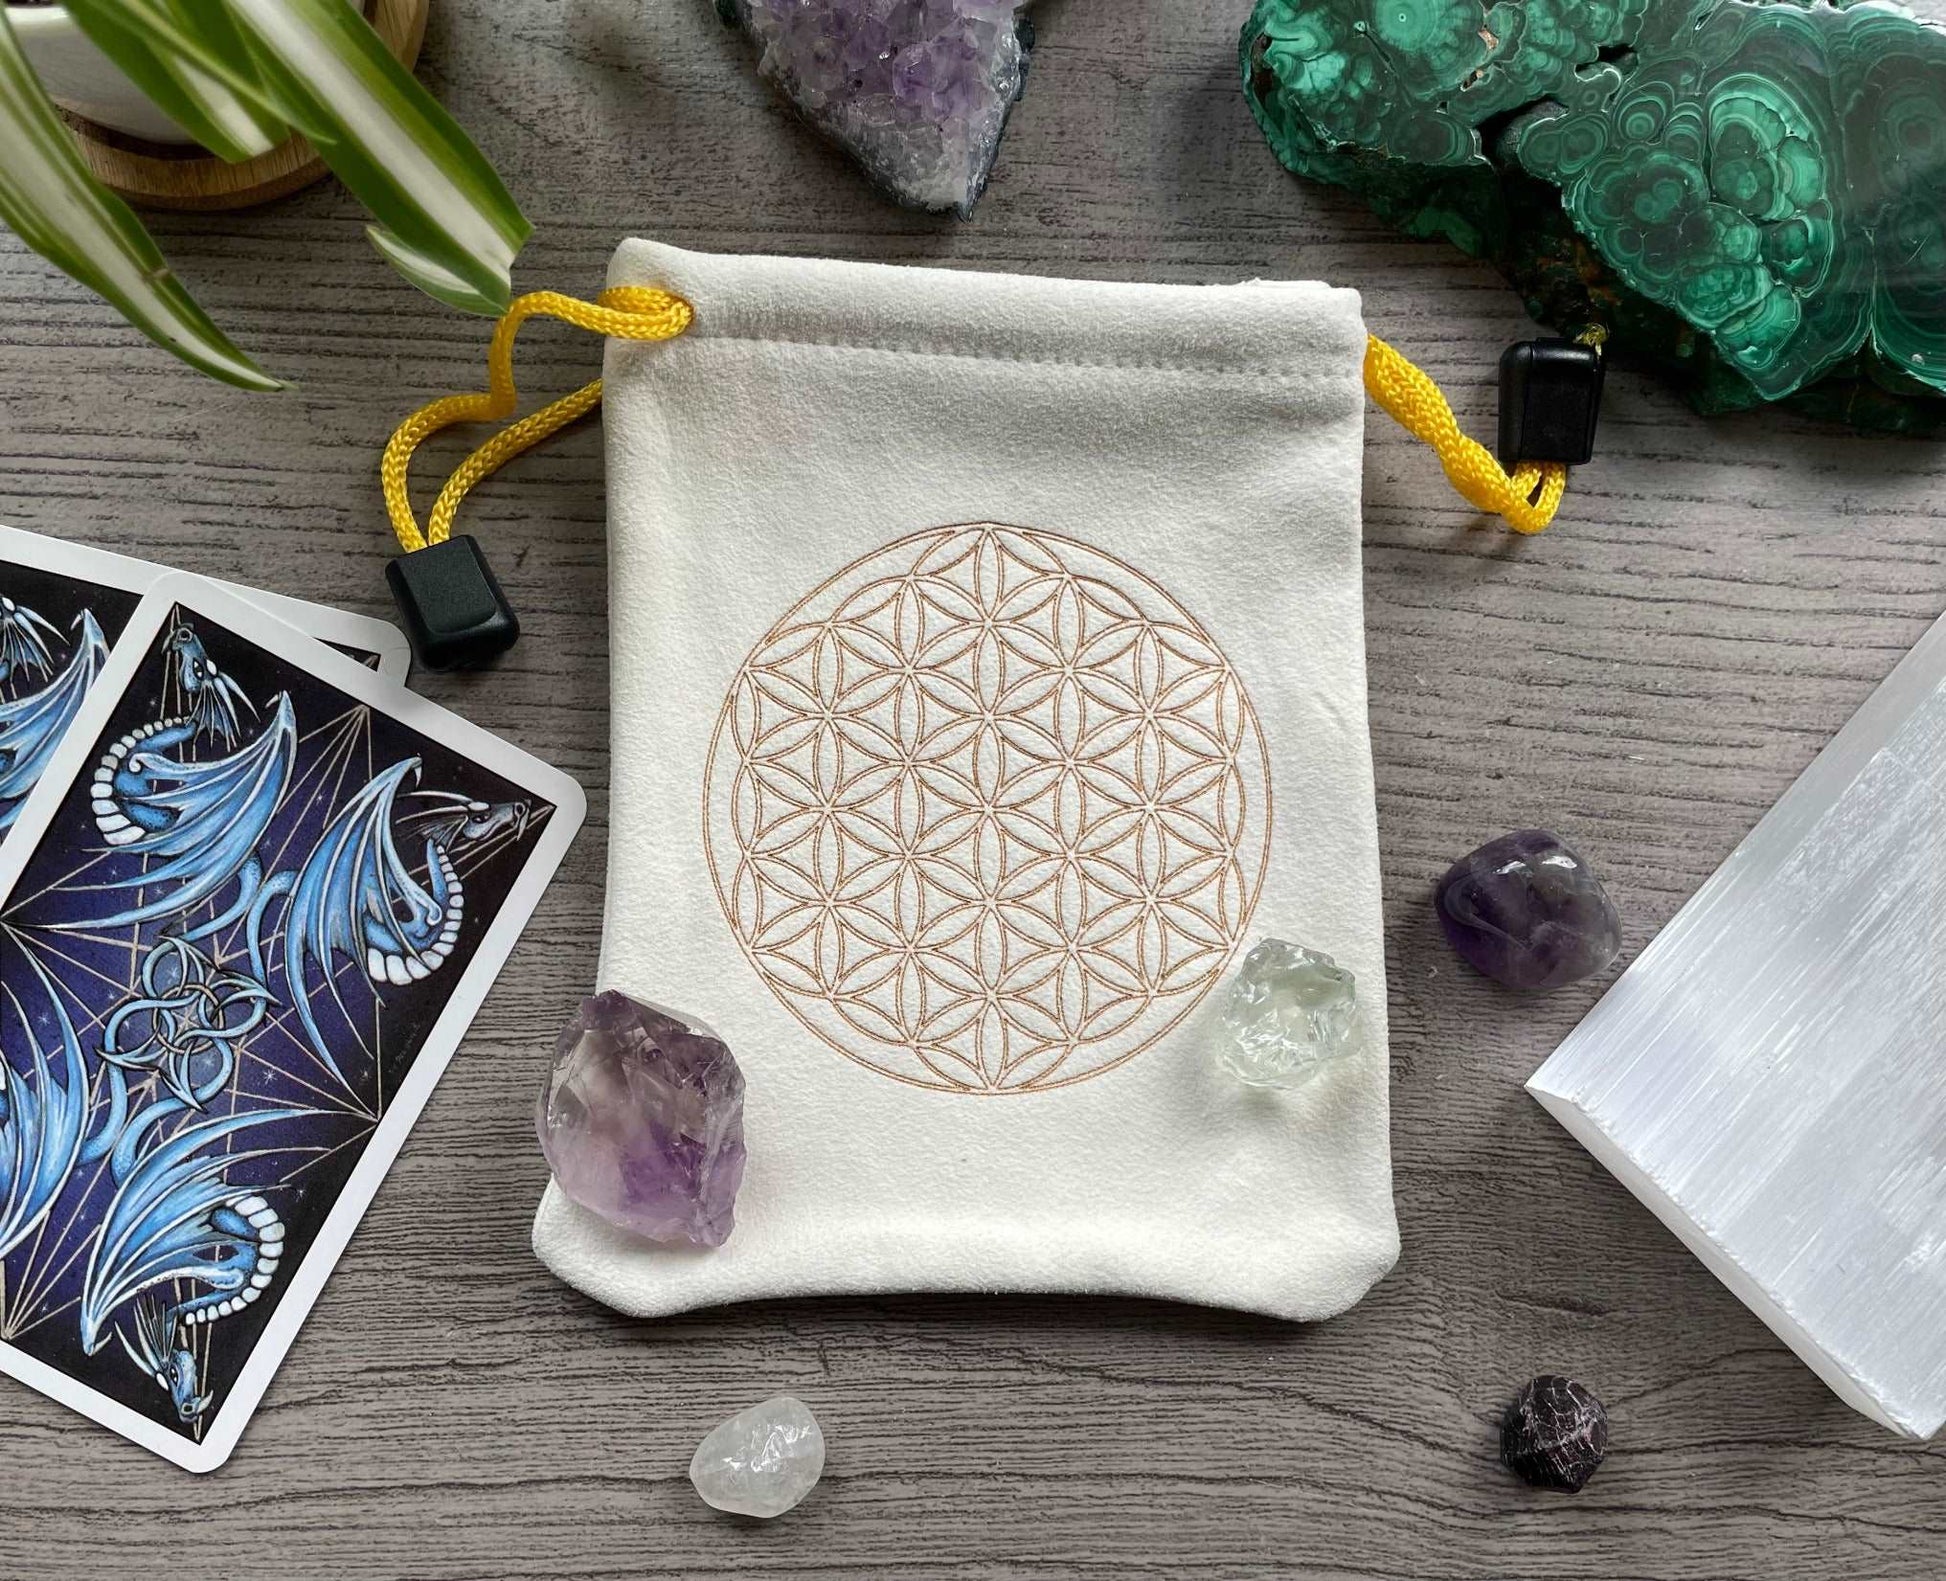 Pictured is a cream-coloured, faux-suede drawstring bag with a flower of life printed on the front.